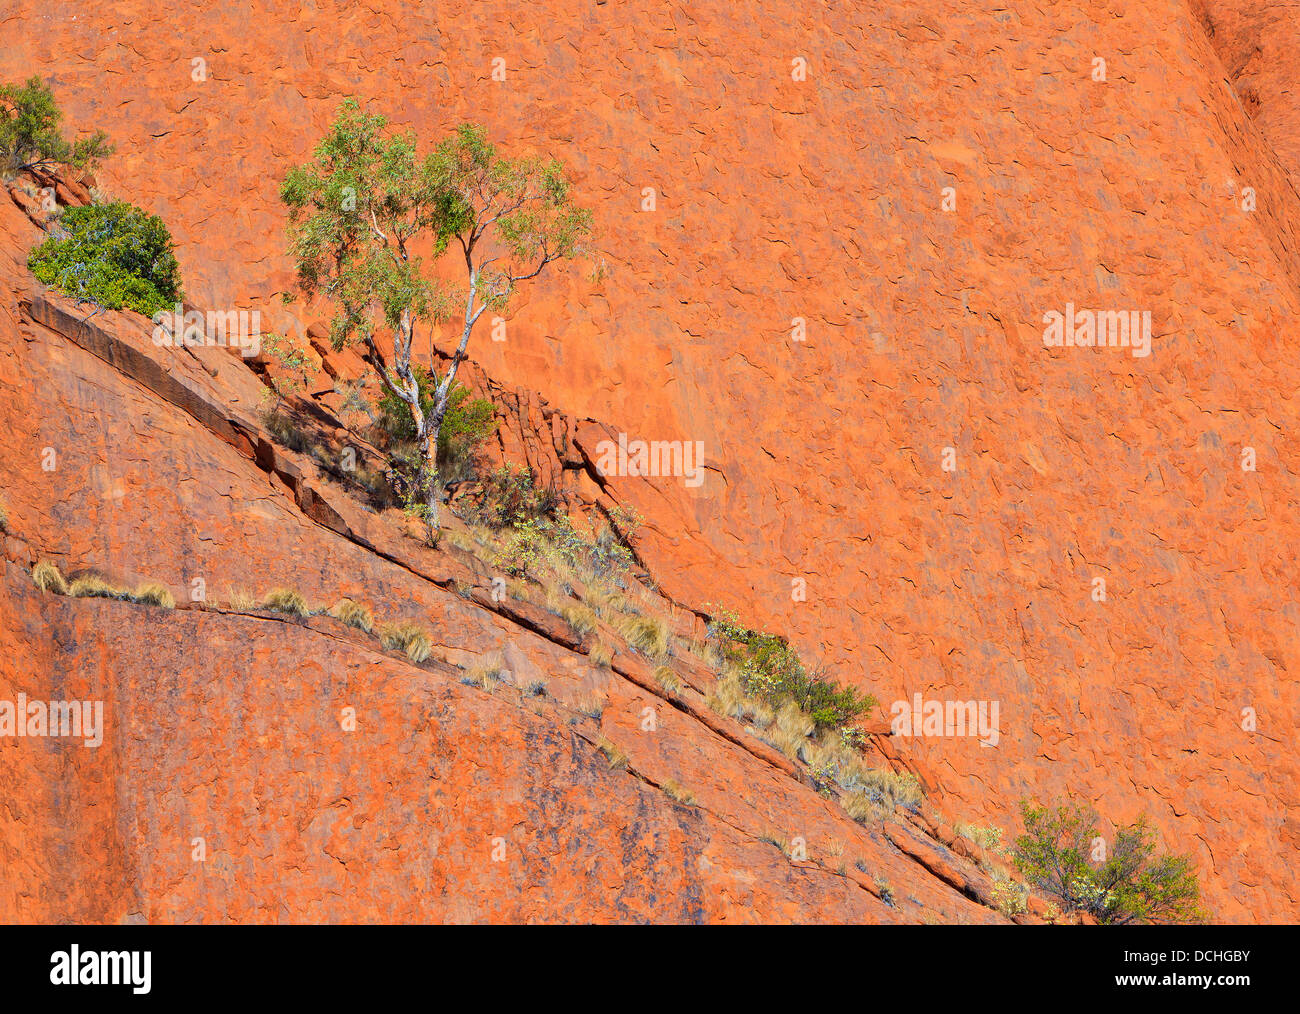 Ayers Rock Central Australia Northern Territory Stock Photo